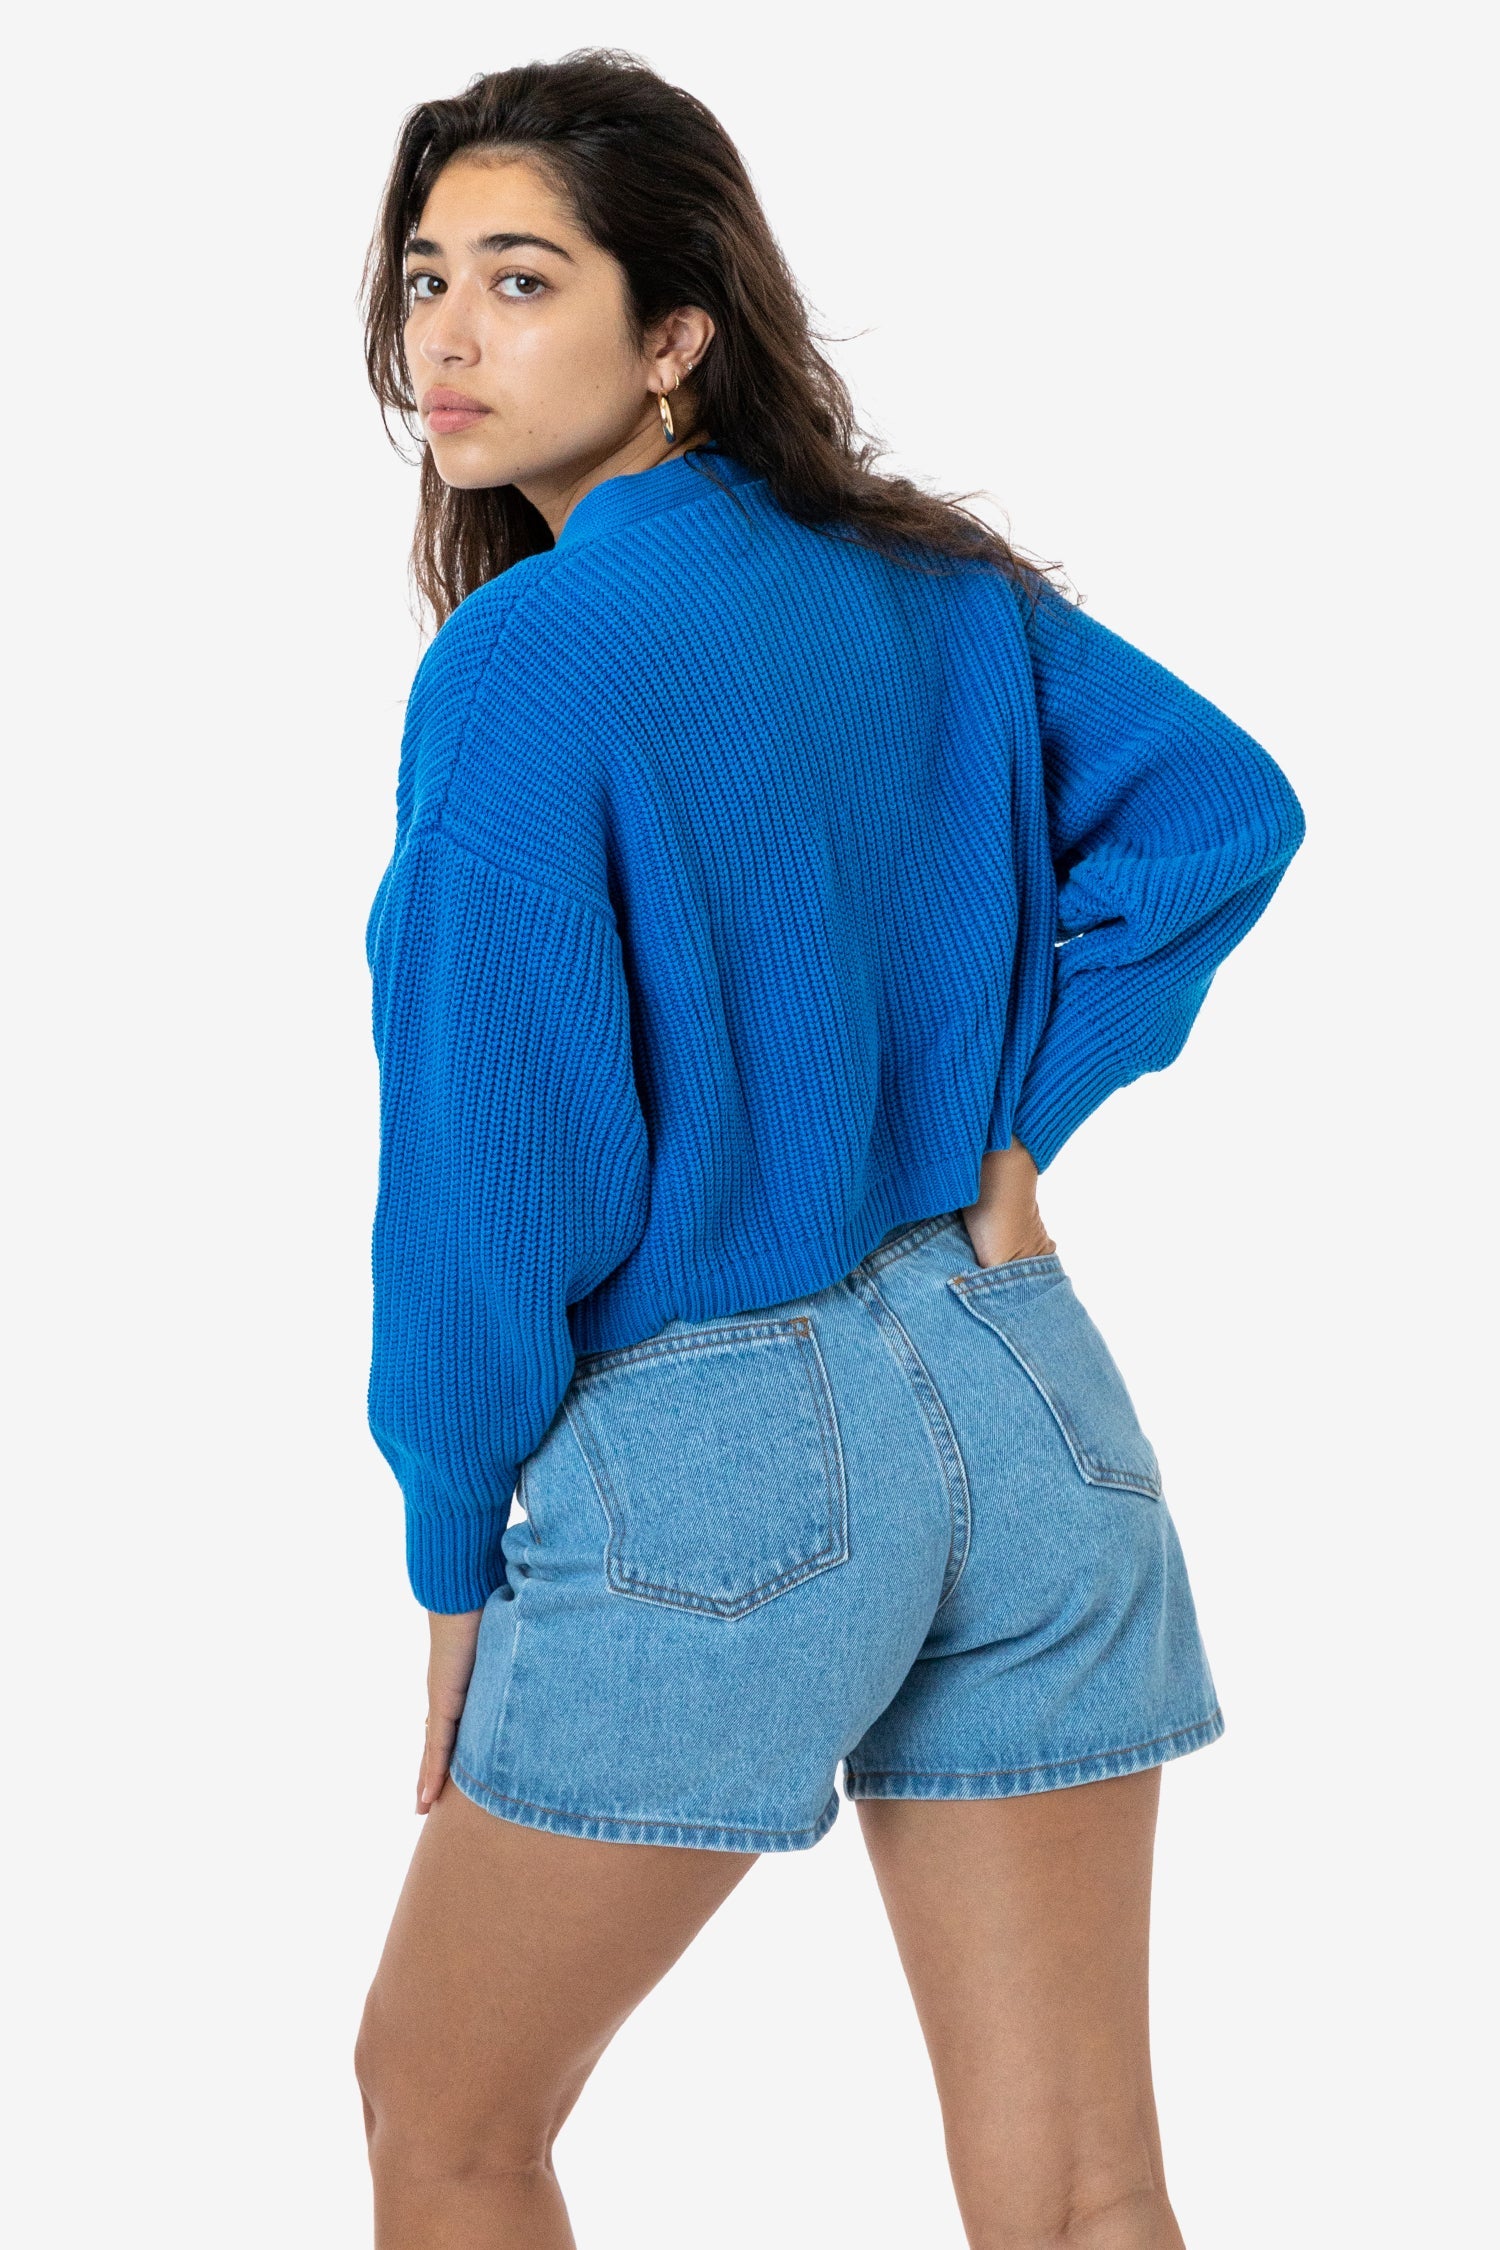 Los Angeles Apparel | Fisherman Cropped Cardigan for Women in Bright Orange